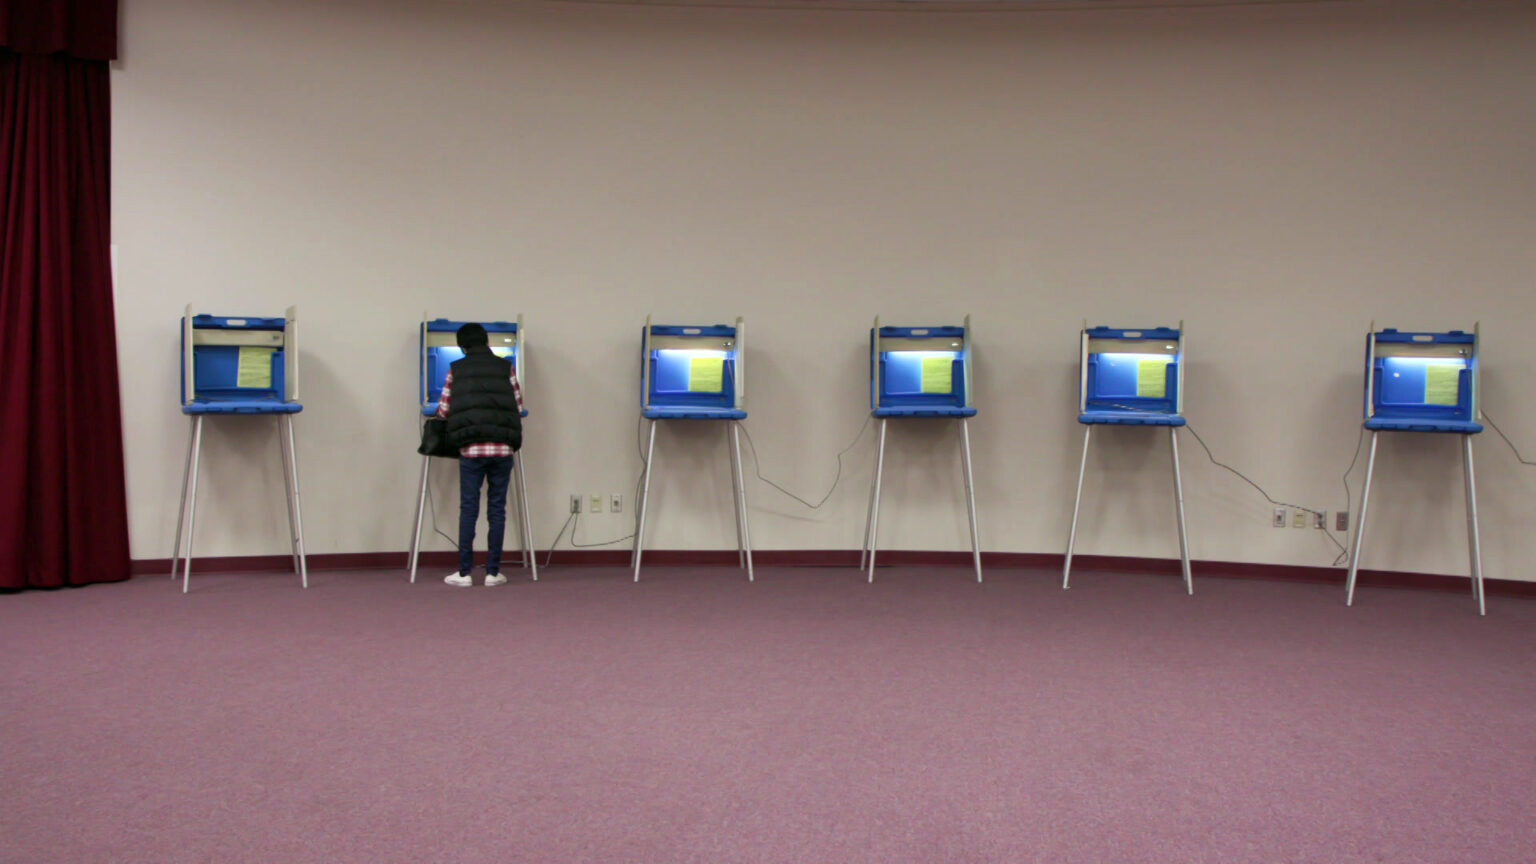 A voter fills out a ballot while standing and facing a voting booth with plastic privacy walls and metal legs, arranged in a row of similar booths in a room with a stage curtain on one side and a blank wall in the background.